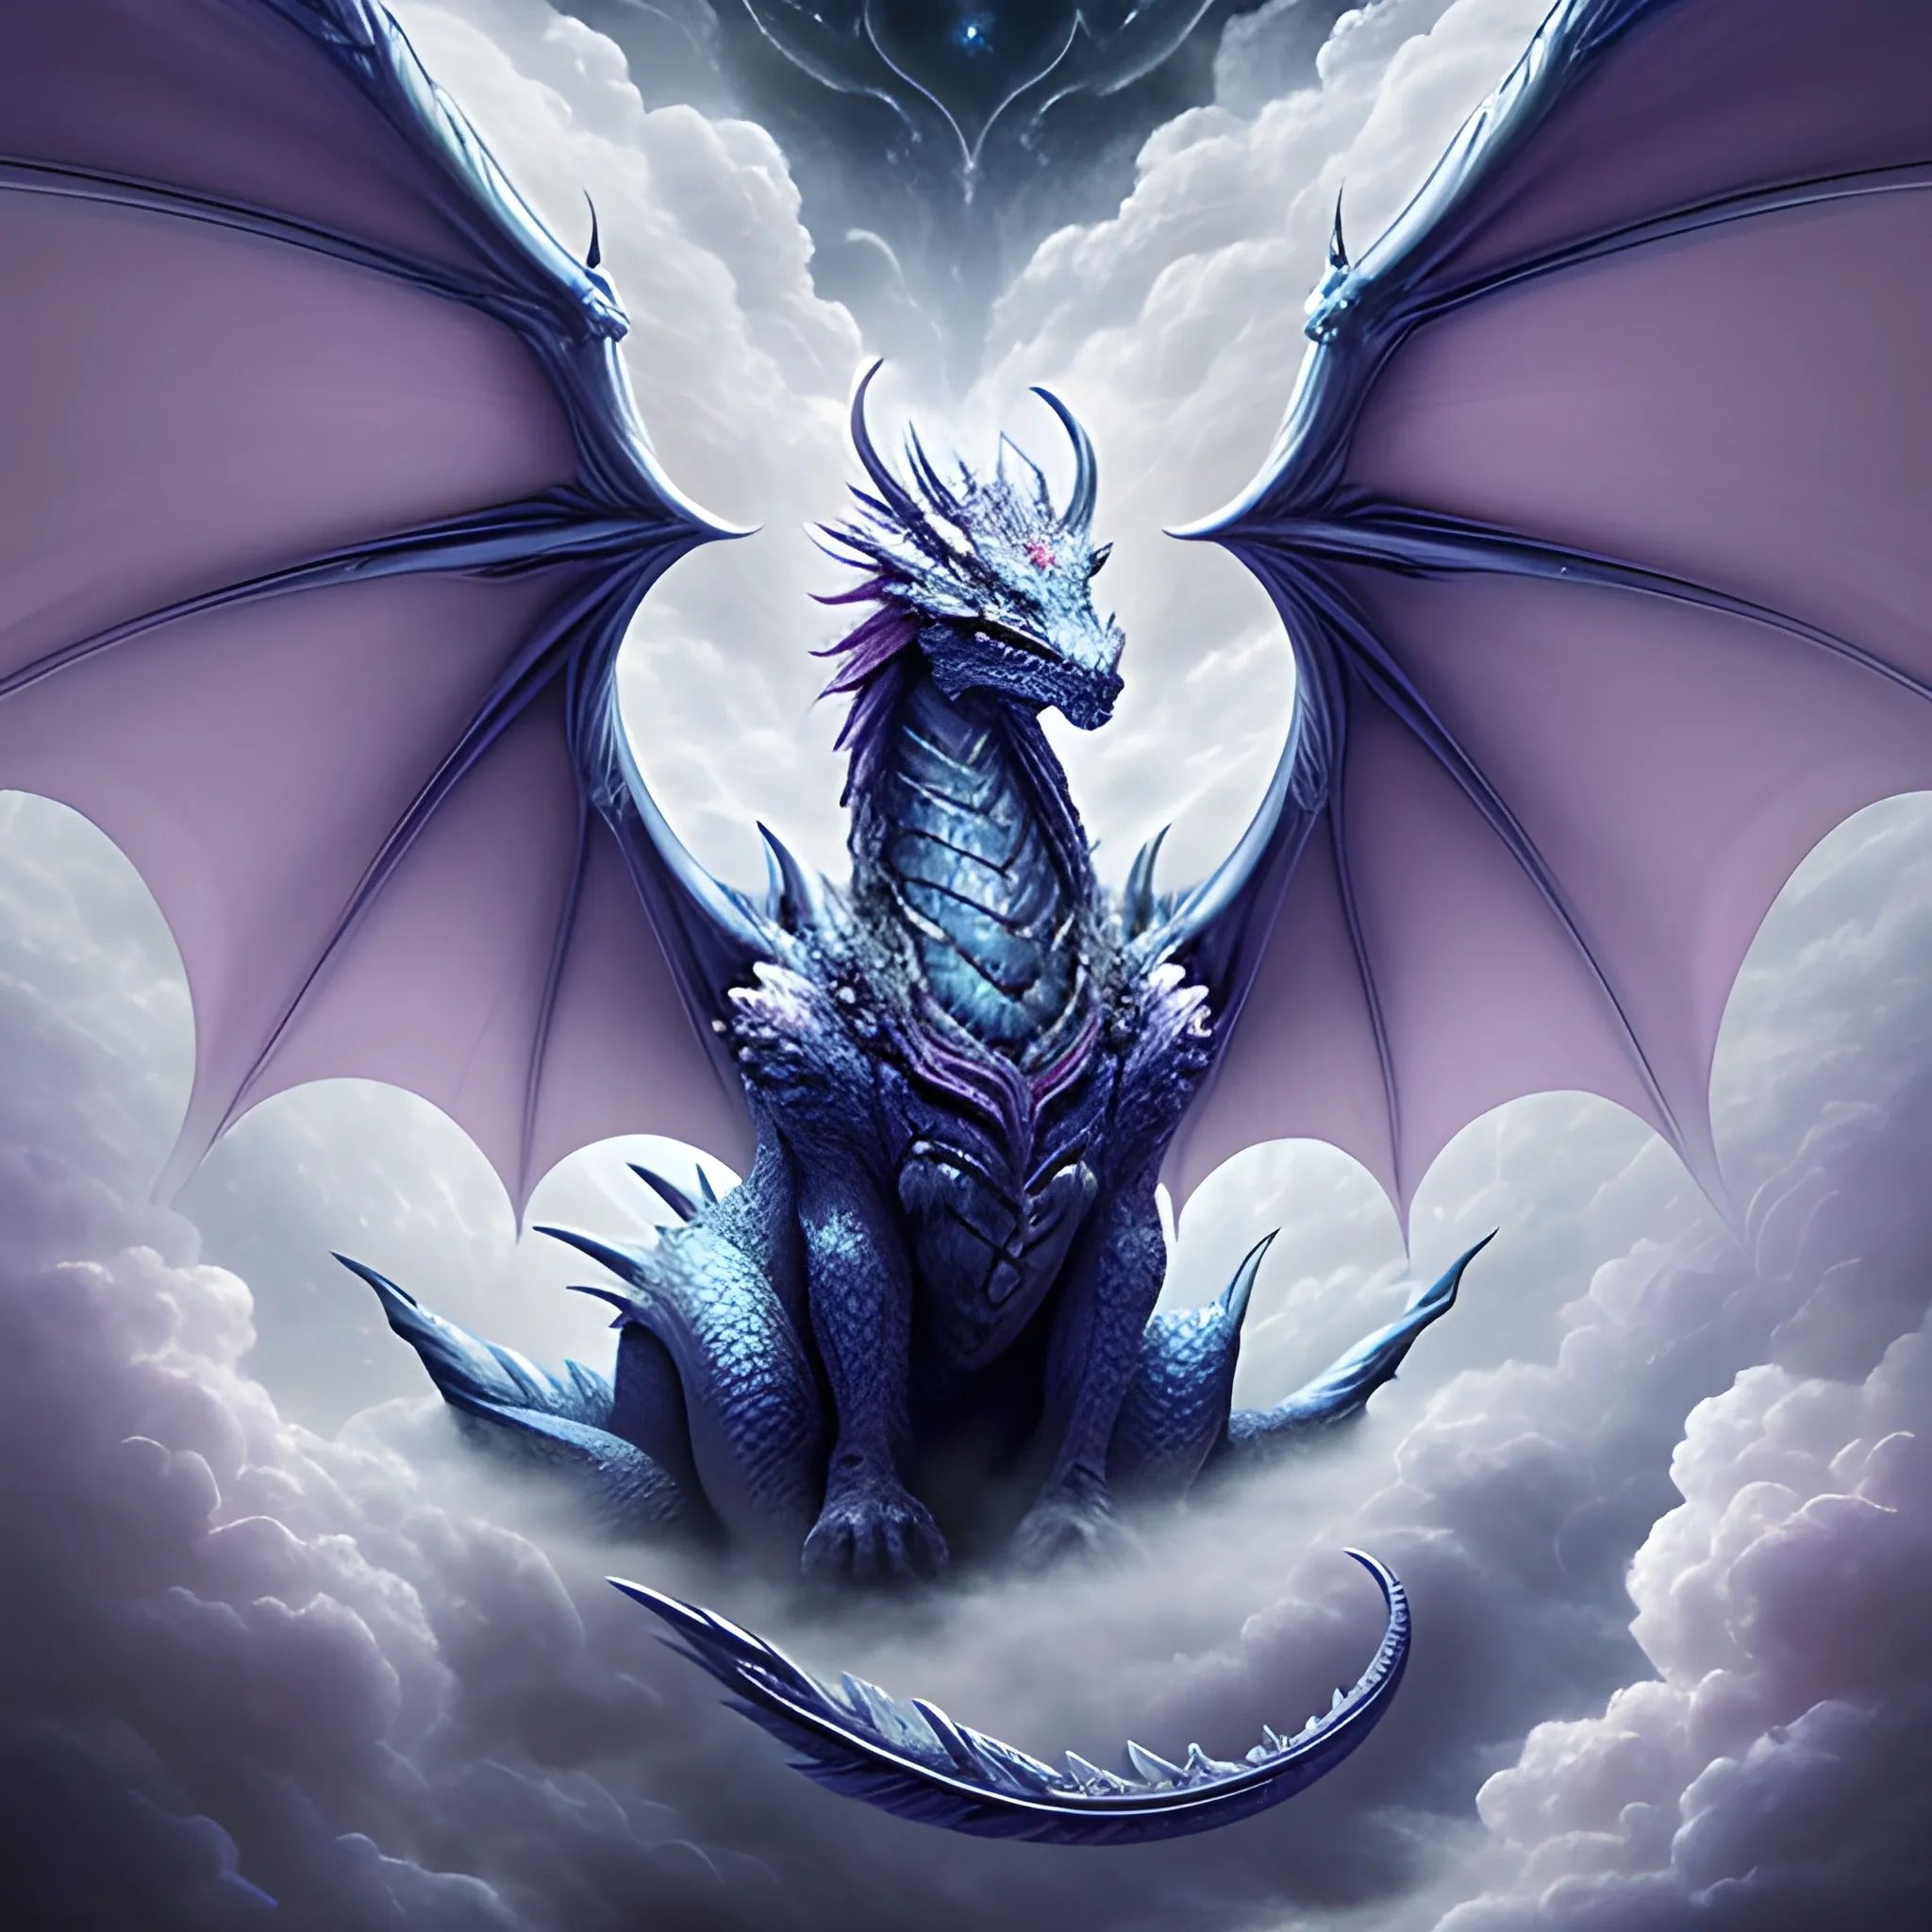 "In the ethereal heavens, a celestial drama unfolds as thick clouds weave together to form a wondrous creature of mythical lore—a majestic dragon. This captivating manifestation has garnered widespread acclaim on Artstation, brought to life through masterful brushstrokes. In a studio portrait, this awe-inspiring creation reveals unrivaled intricacy and breathtaking detail. Every minuscule nuance is rendered with indescribable precision."